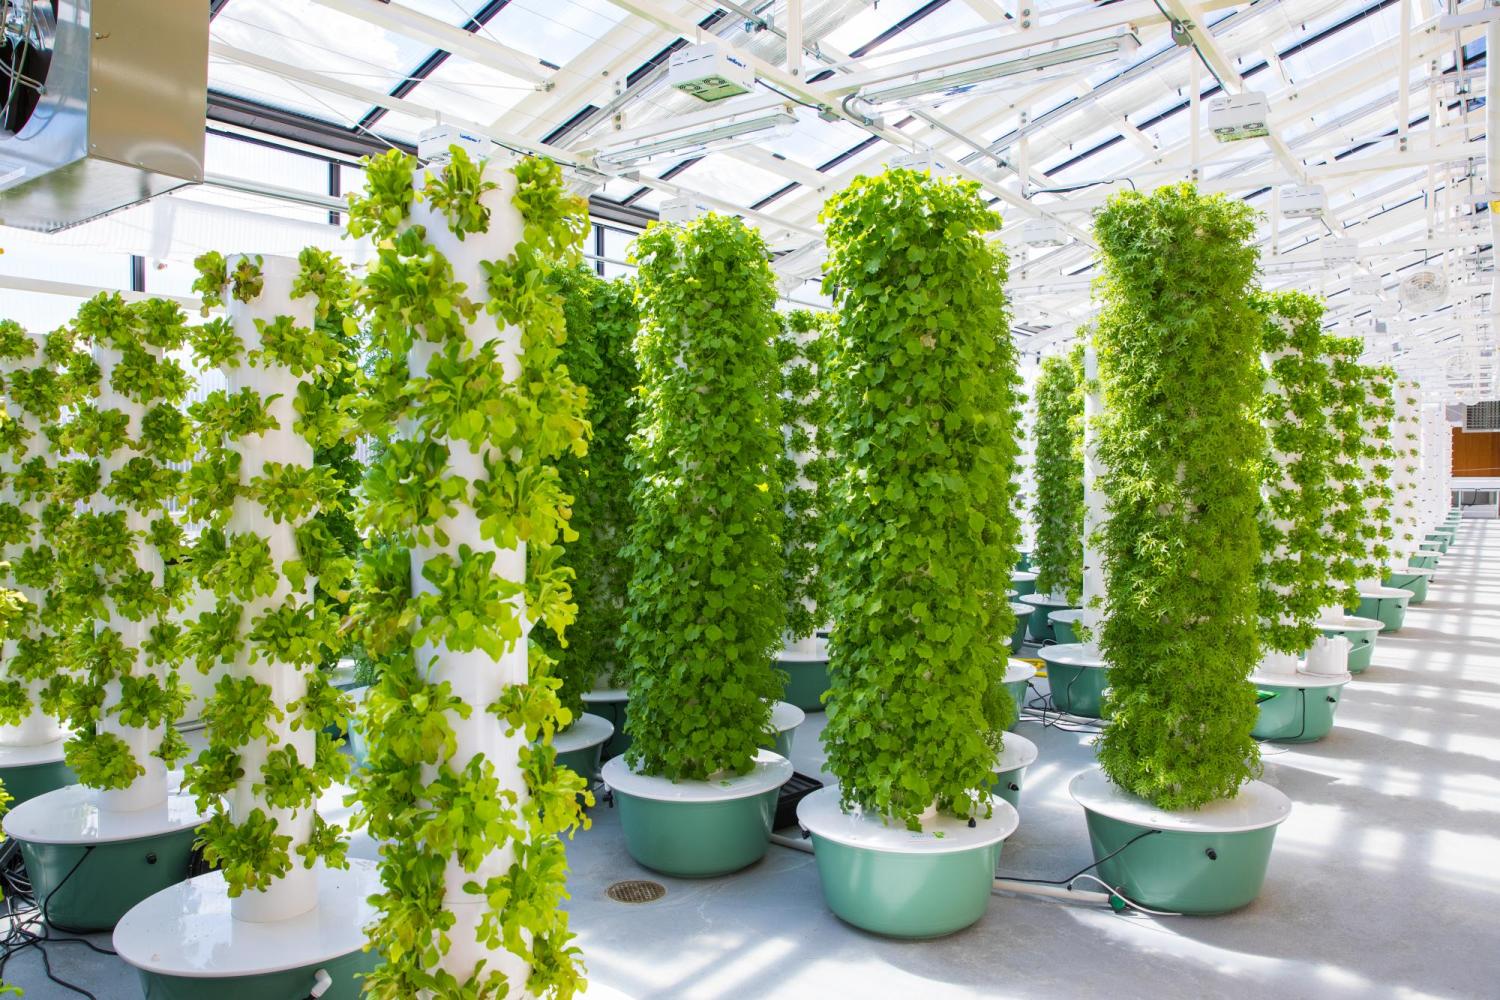 Aeroponic grow towers in the new CU Boulder greenhouse